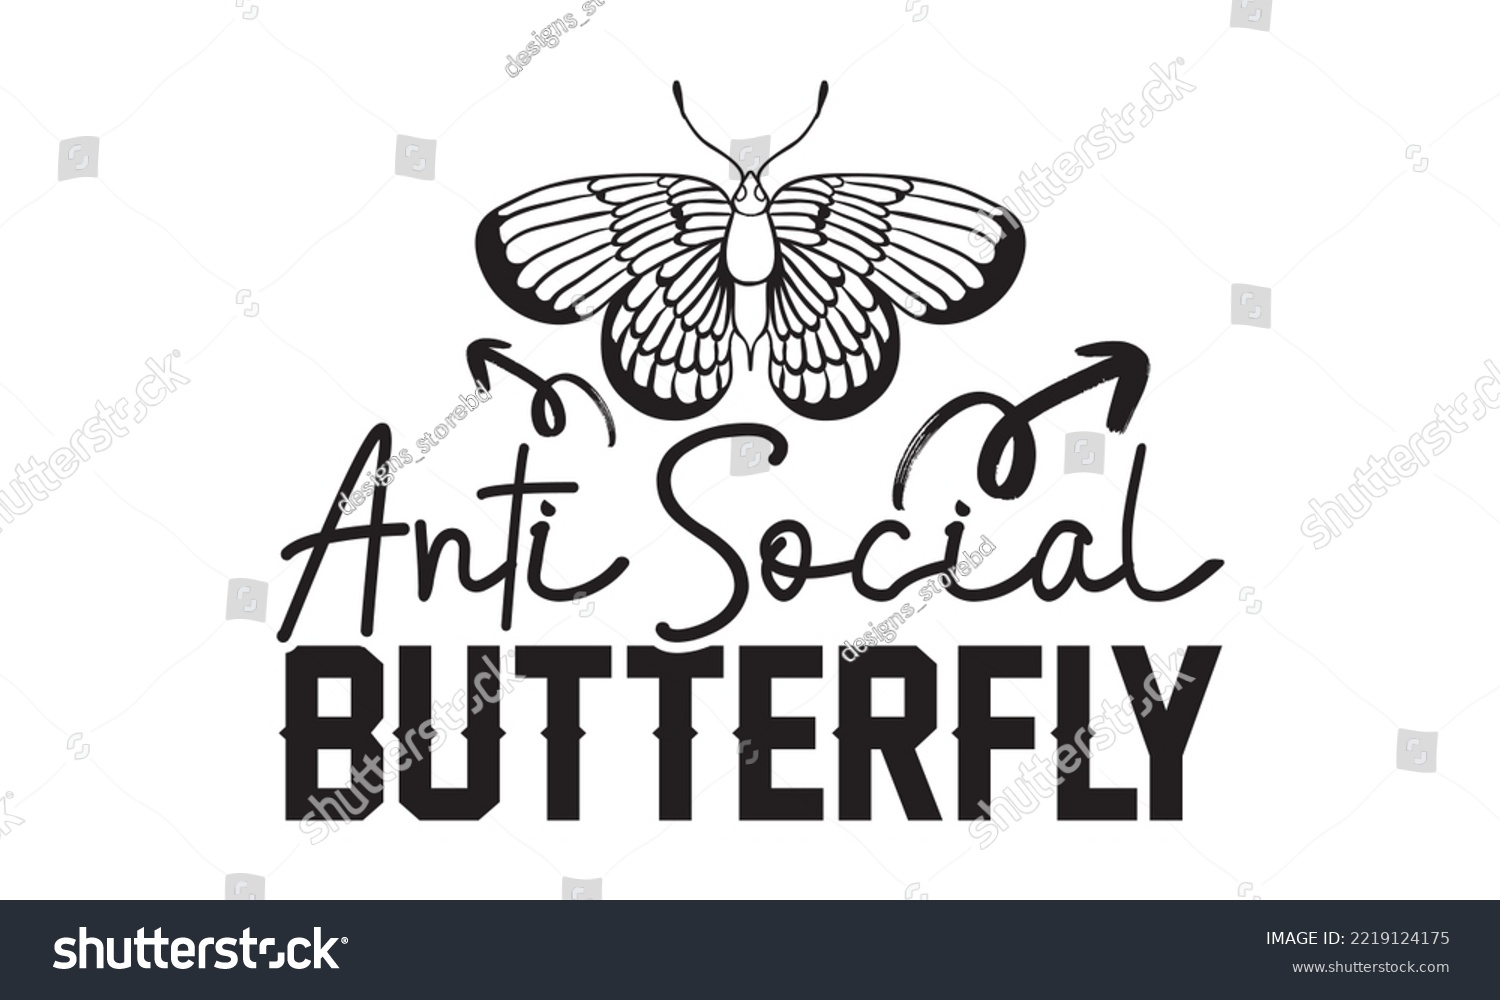 SVG of Anti Social Butterfly Svg, Butterfly svg, Butterfly svg t-shirt design, butterflies and daisies positive quote flower watercolor margarita mariposa stationery, mug, t shirt, svg, eps 10 svg